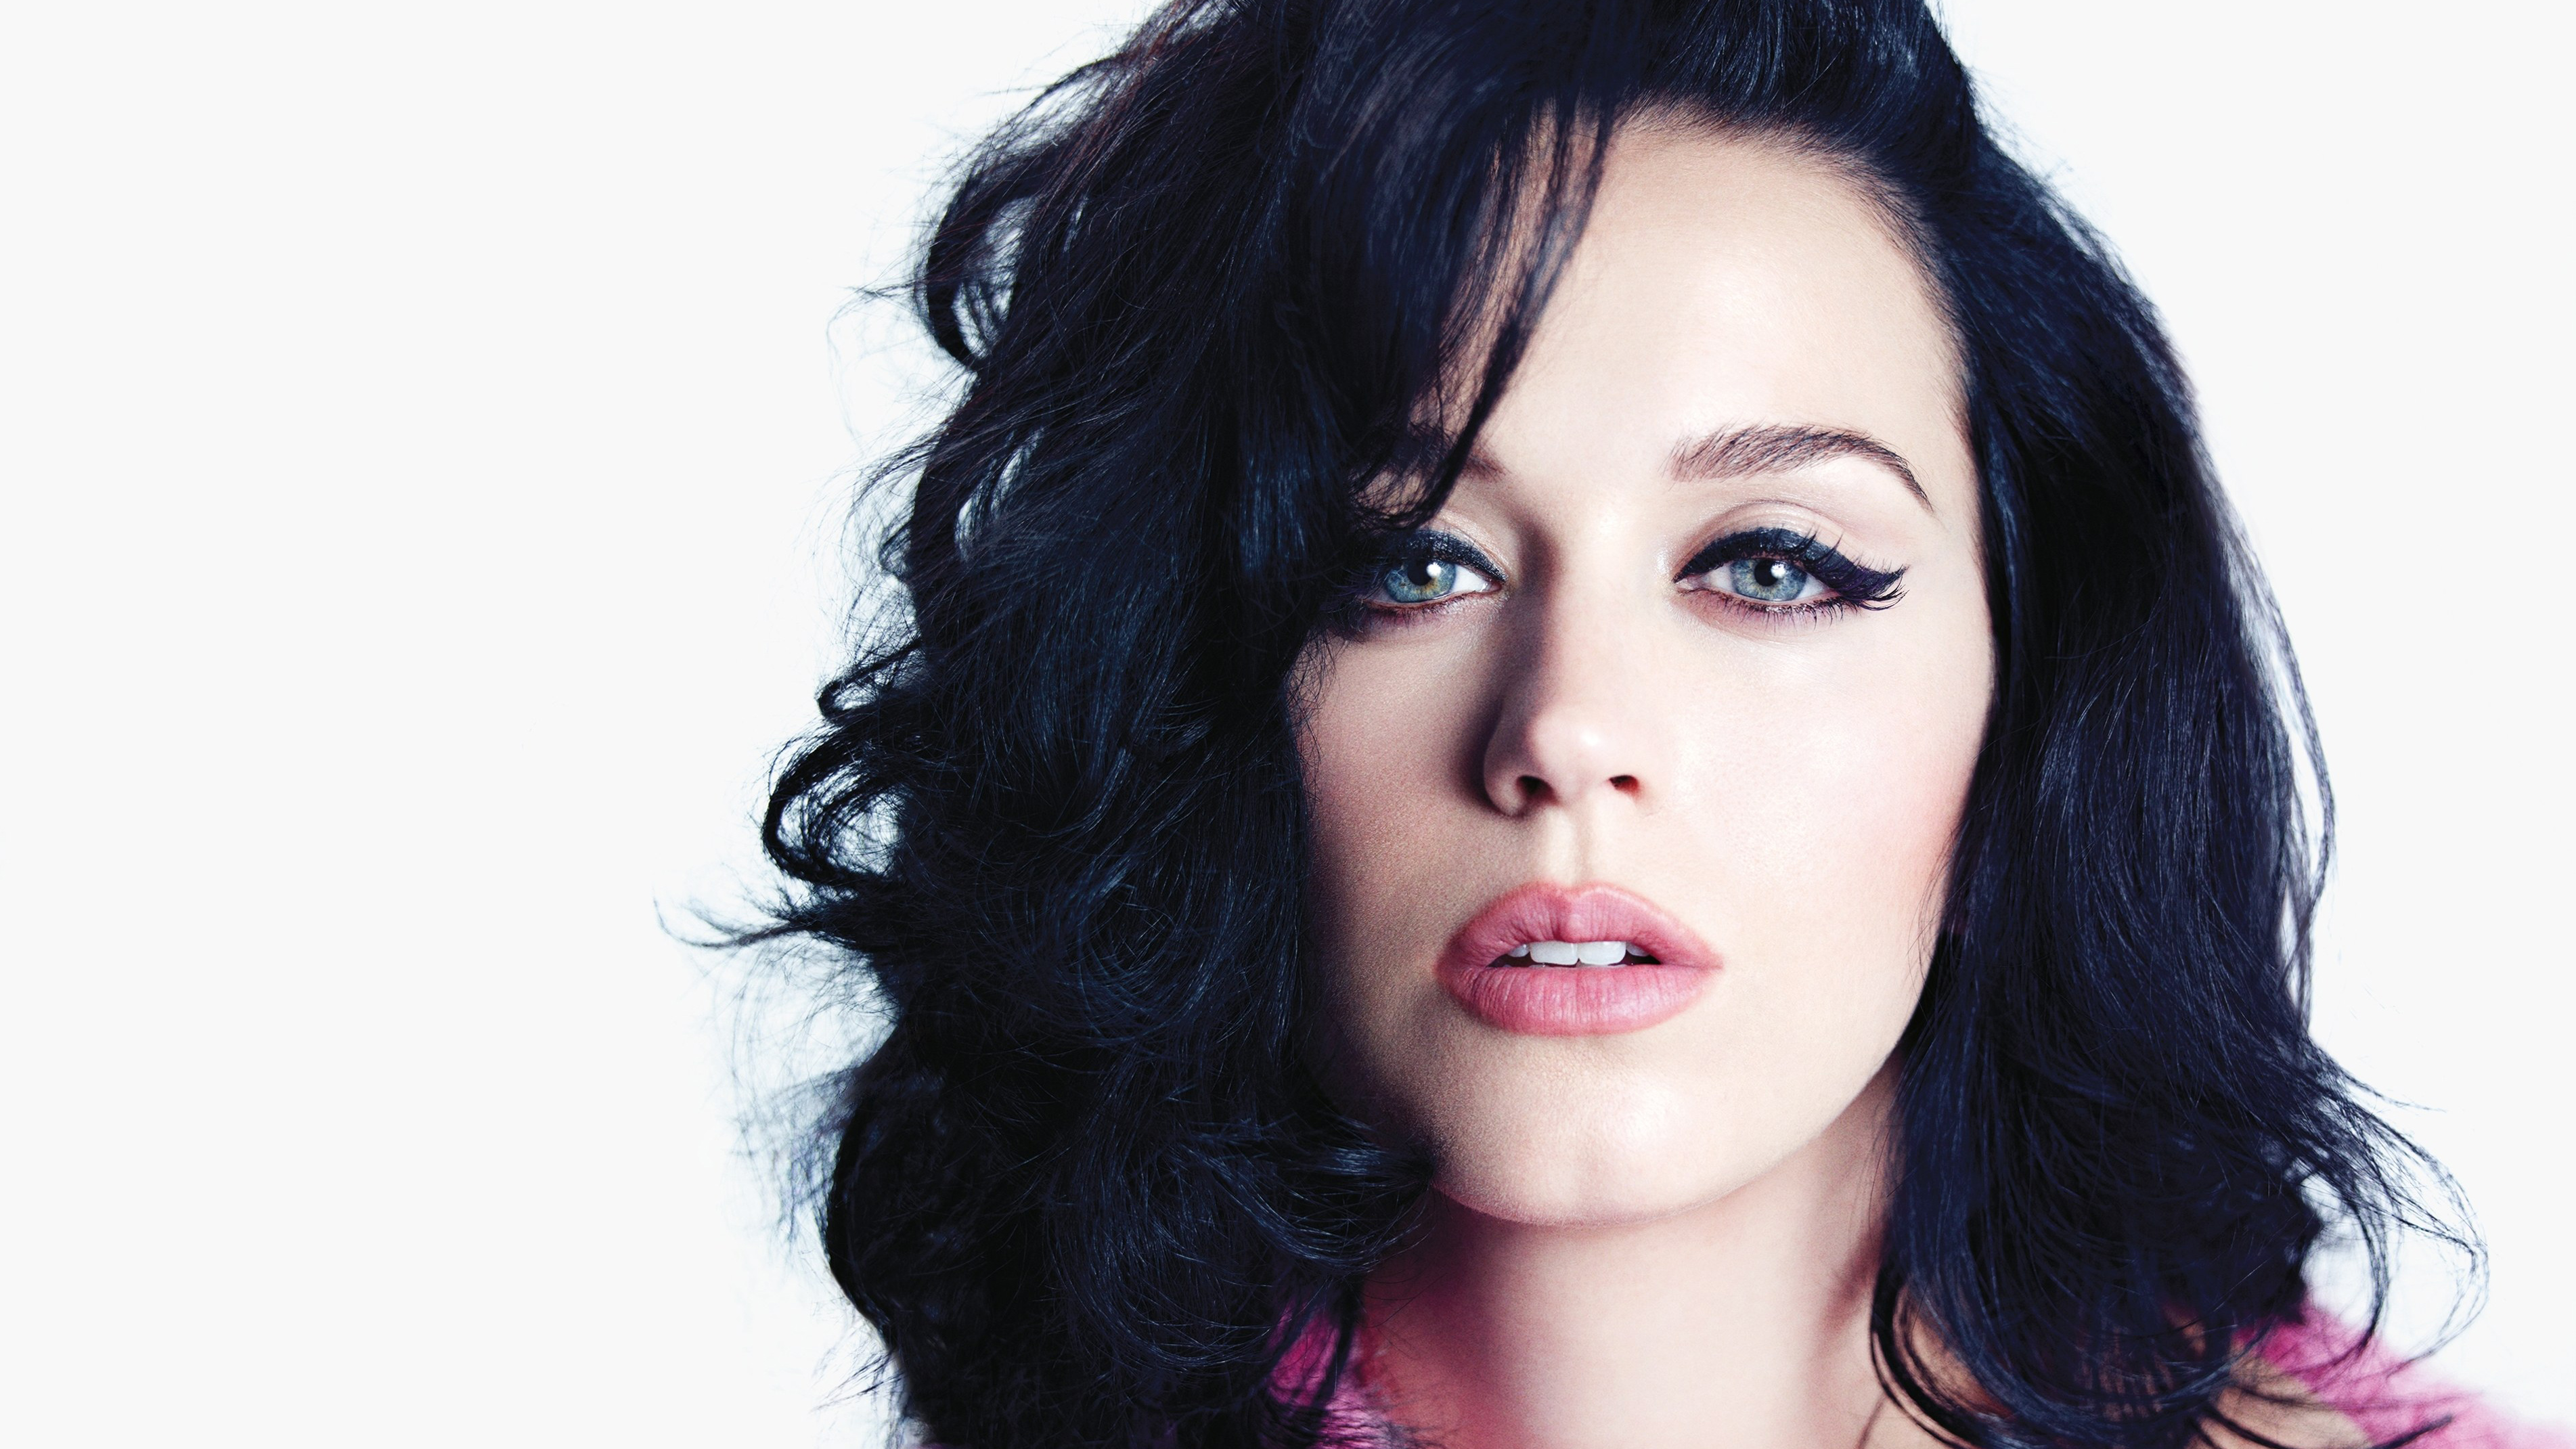 American Black Hair Blue Eyes Close Up Face Katy Perry Singer Woman 3806x2141